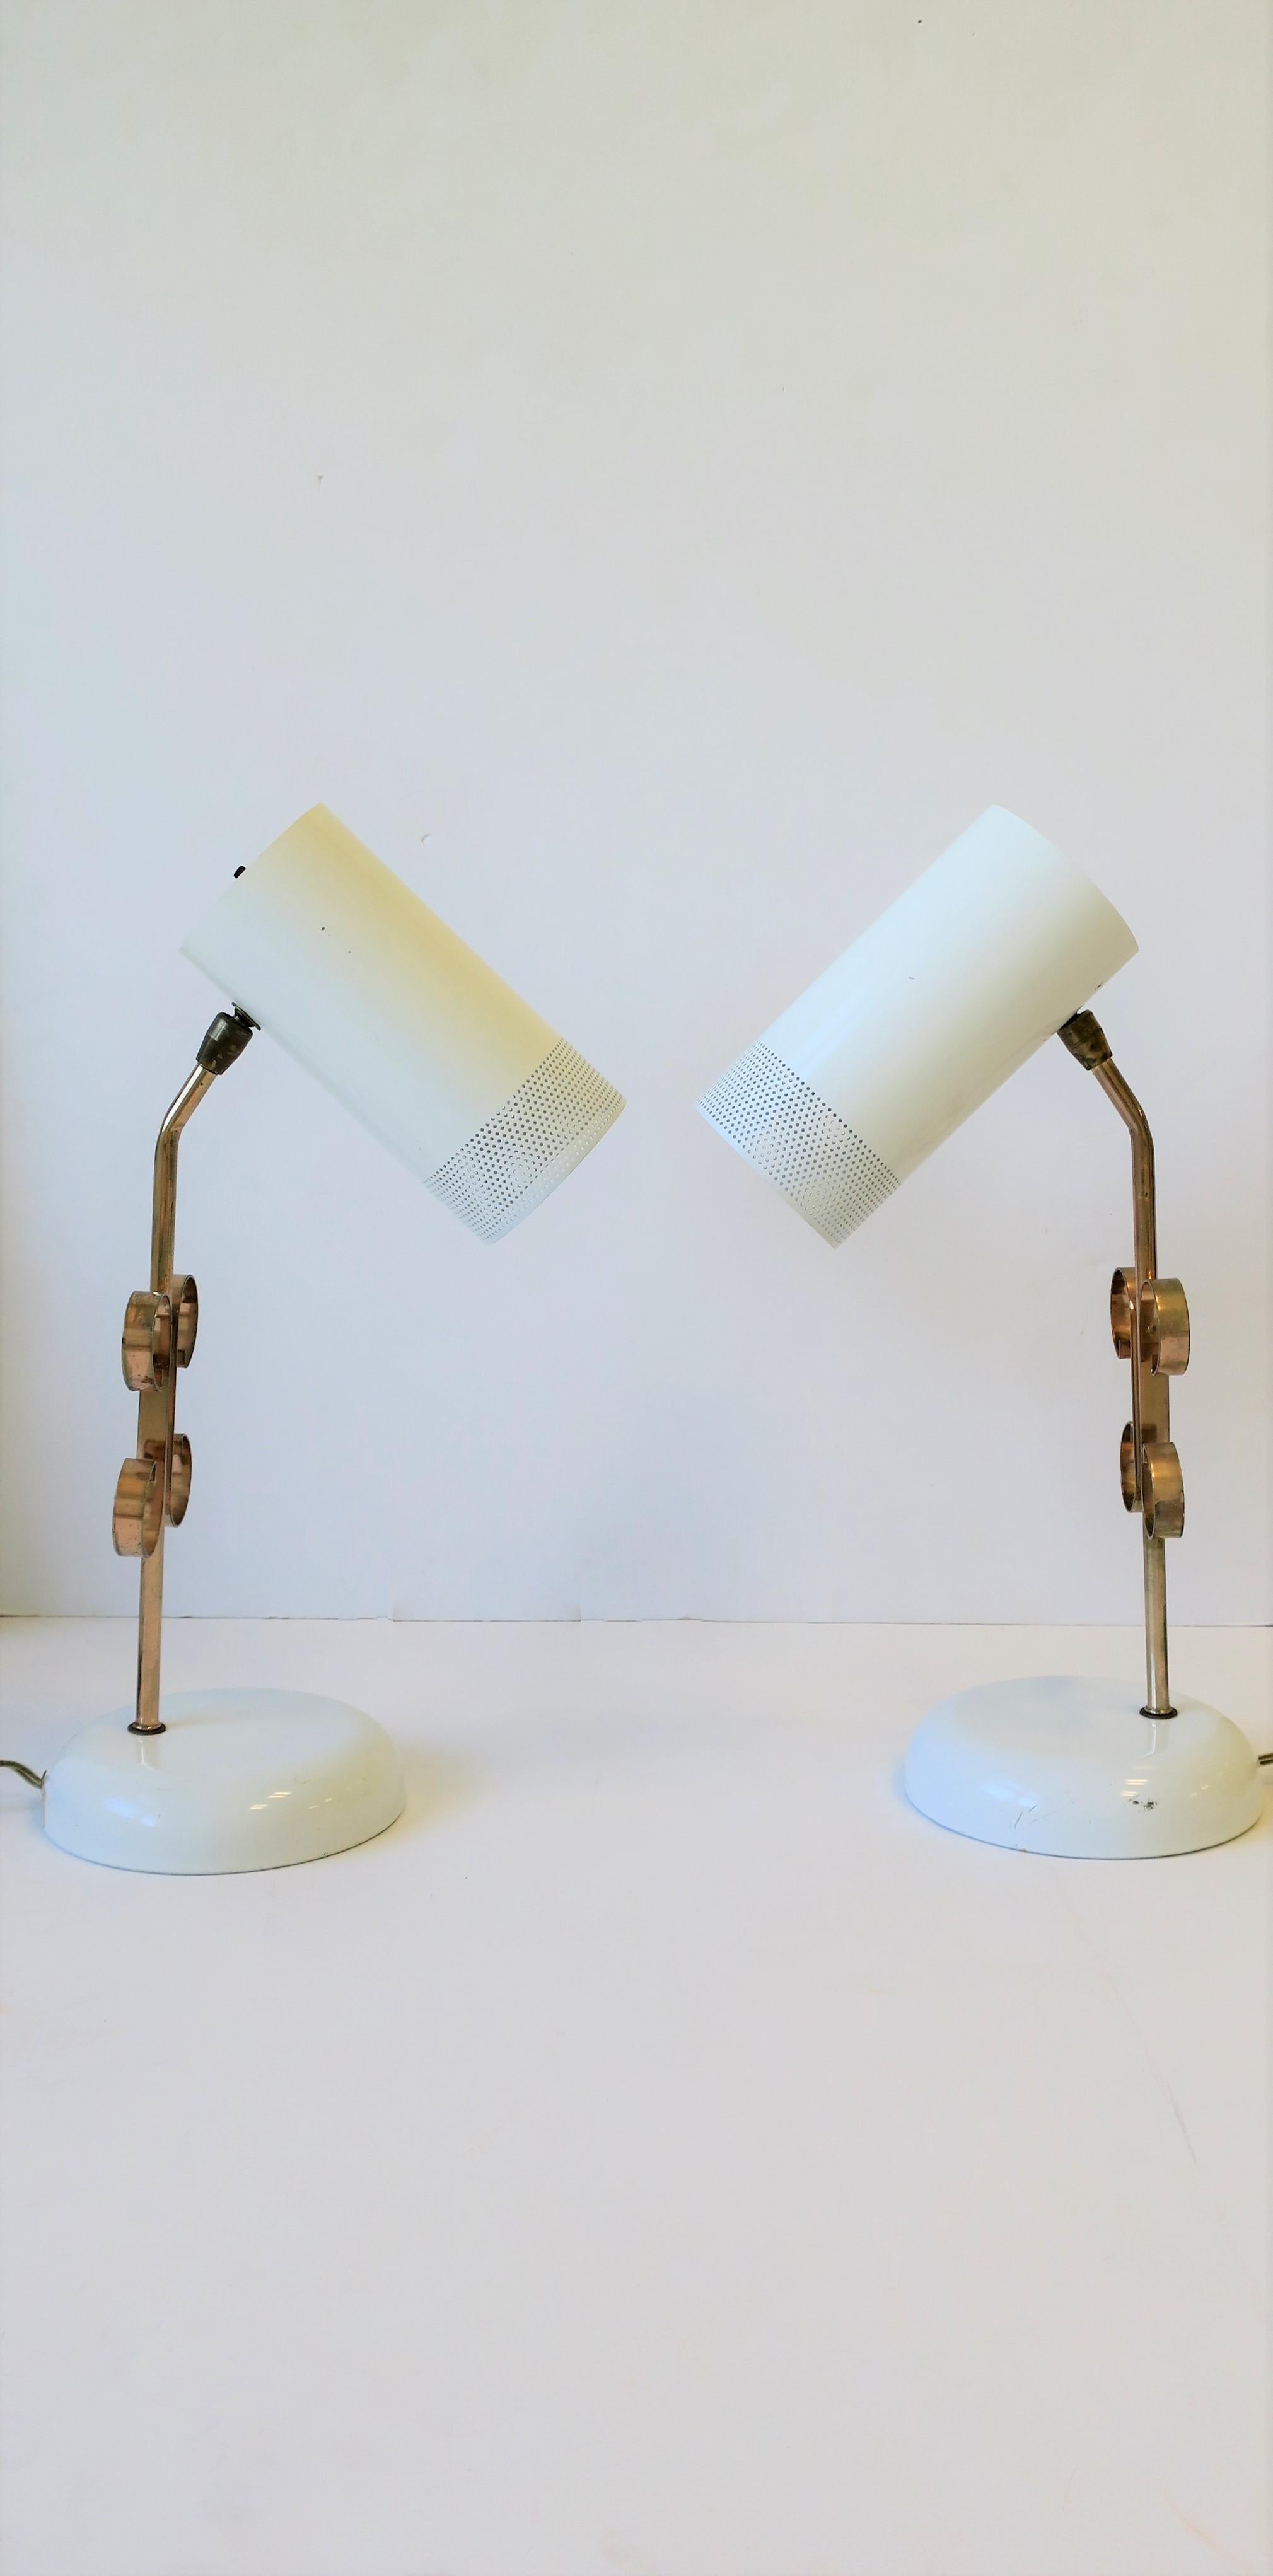 A pair of Modern white and rose-pink metal table lamps, circa early 1970s. A chic and rare pair of 1970s Modern white enameled metal table lamps; Pair are white metal shades with perforated detail that adjust up/down and side to side as demonstrated